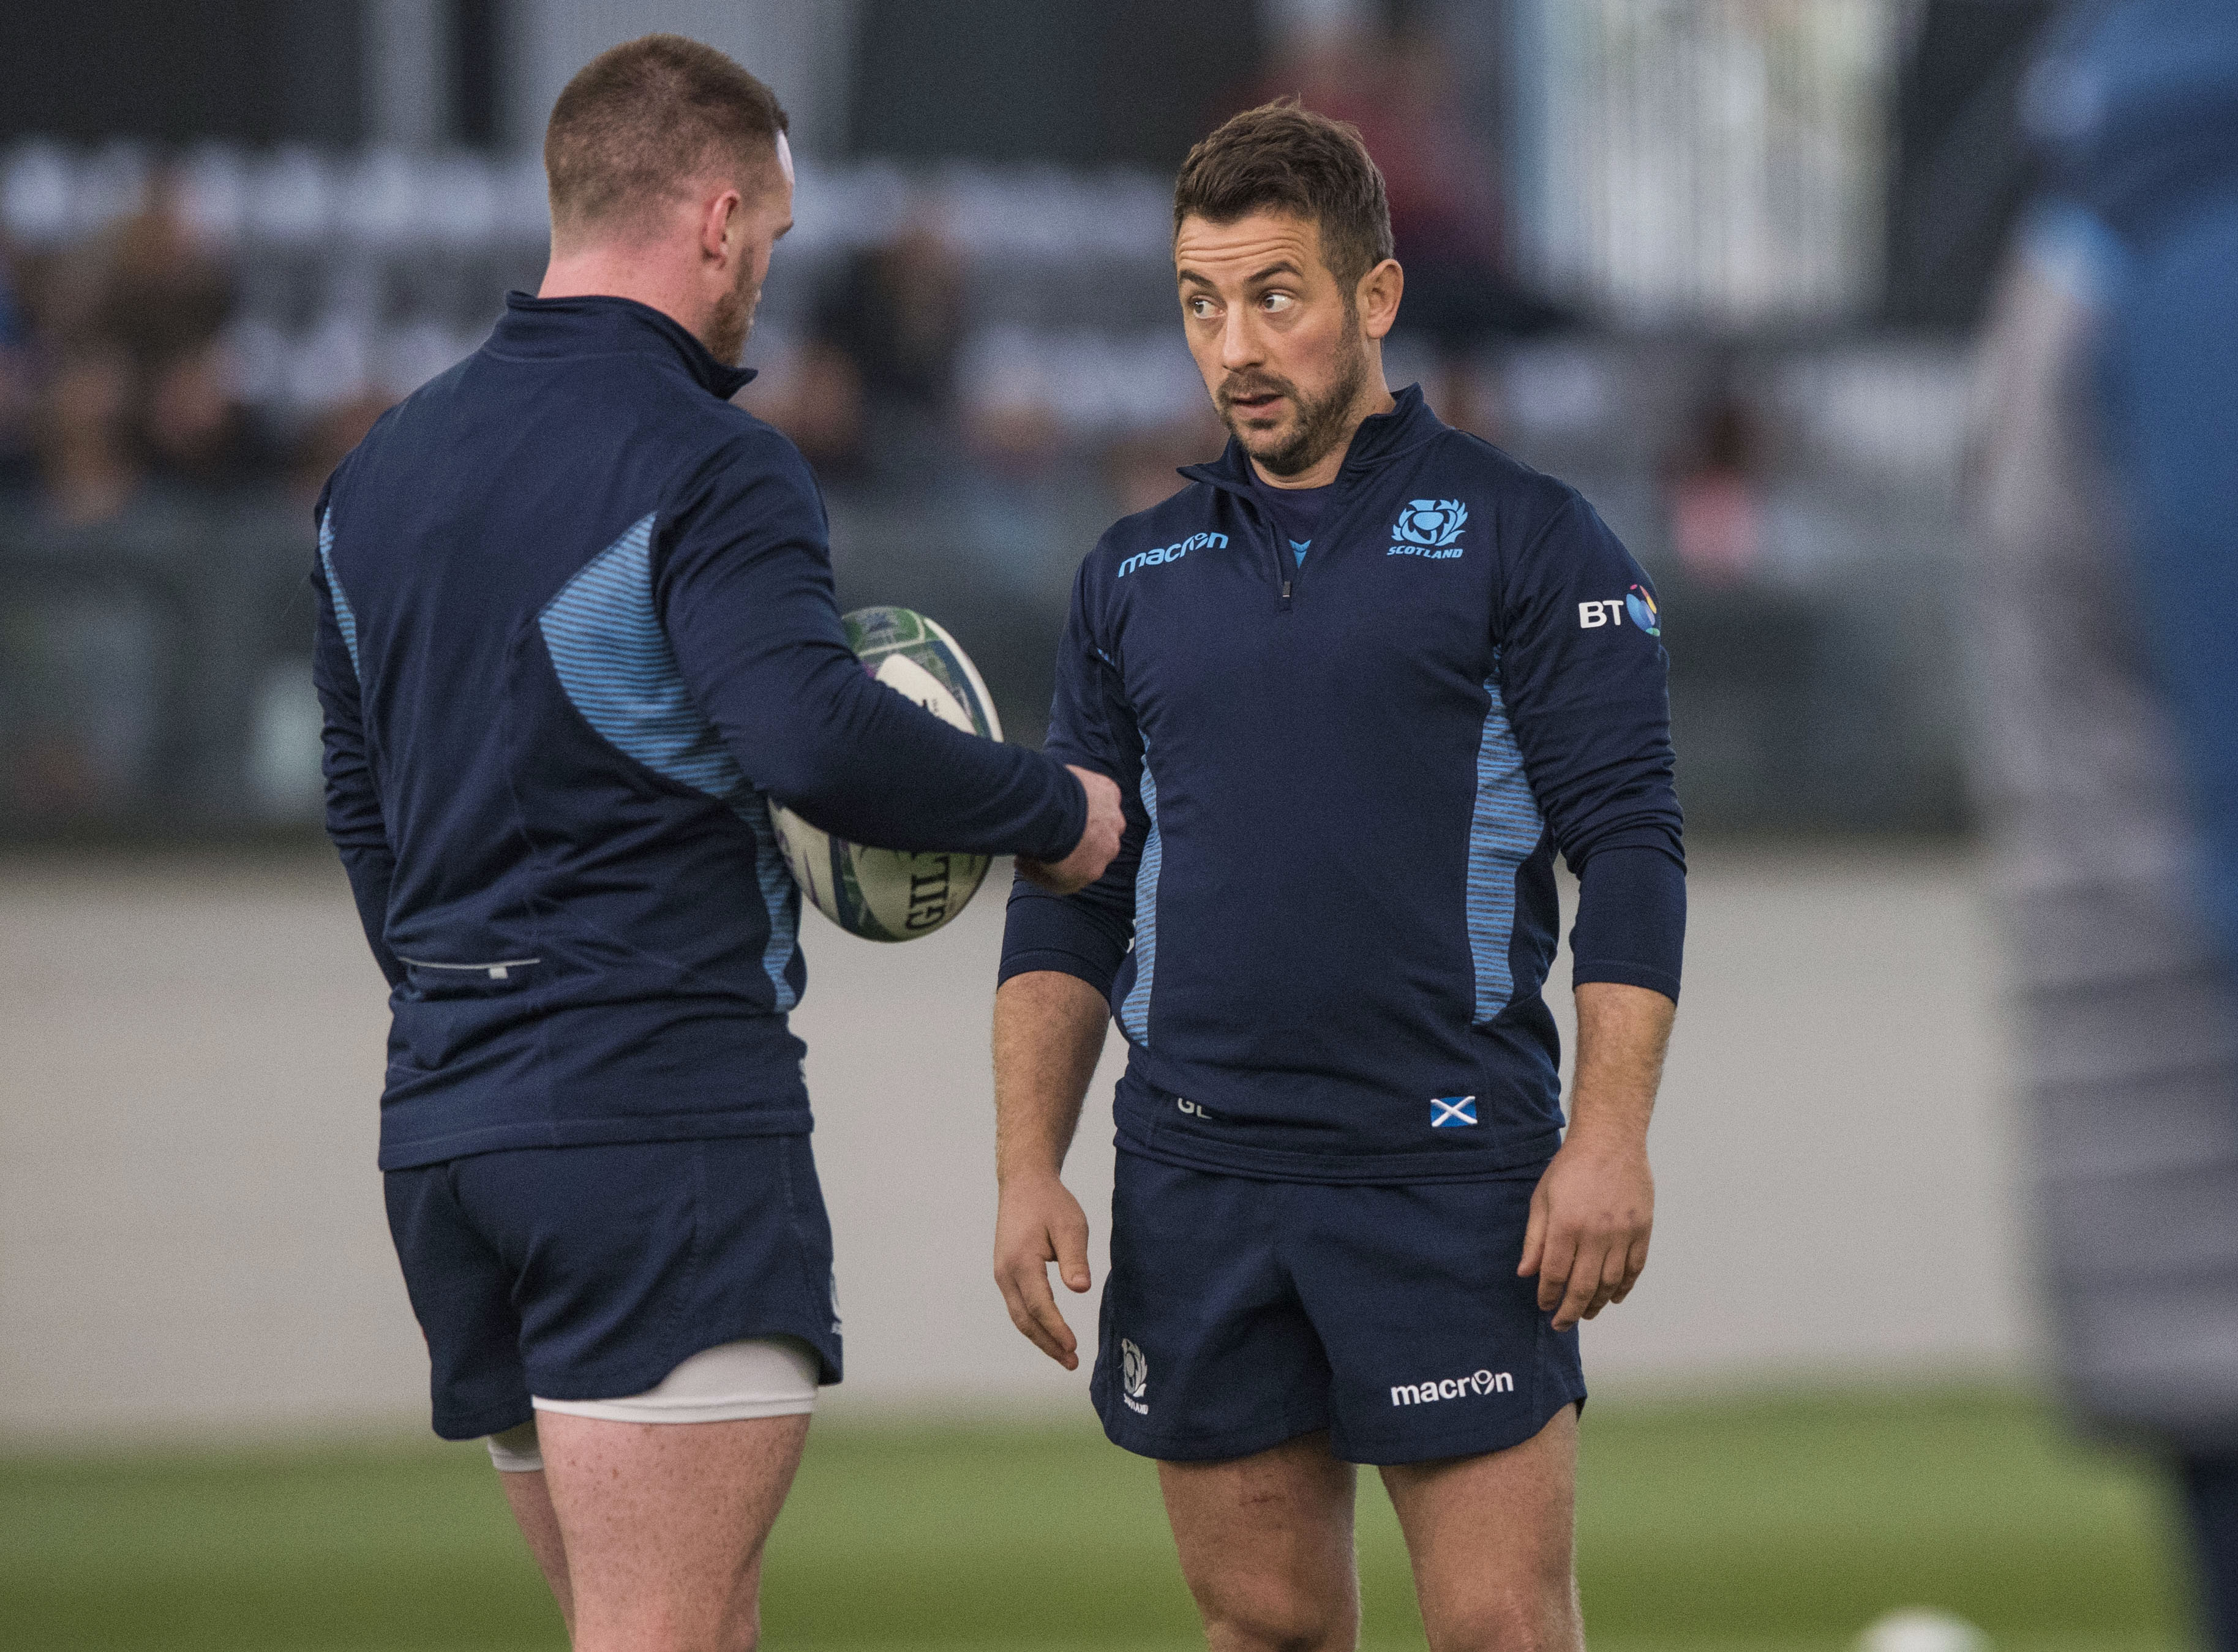 Scotland's Greig Laidlaw admits he sometimes "gives a little look" to keep Finn Russell in check.